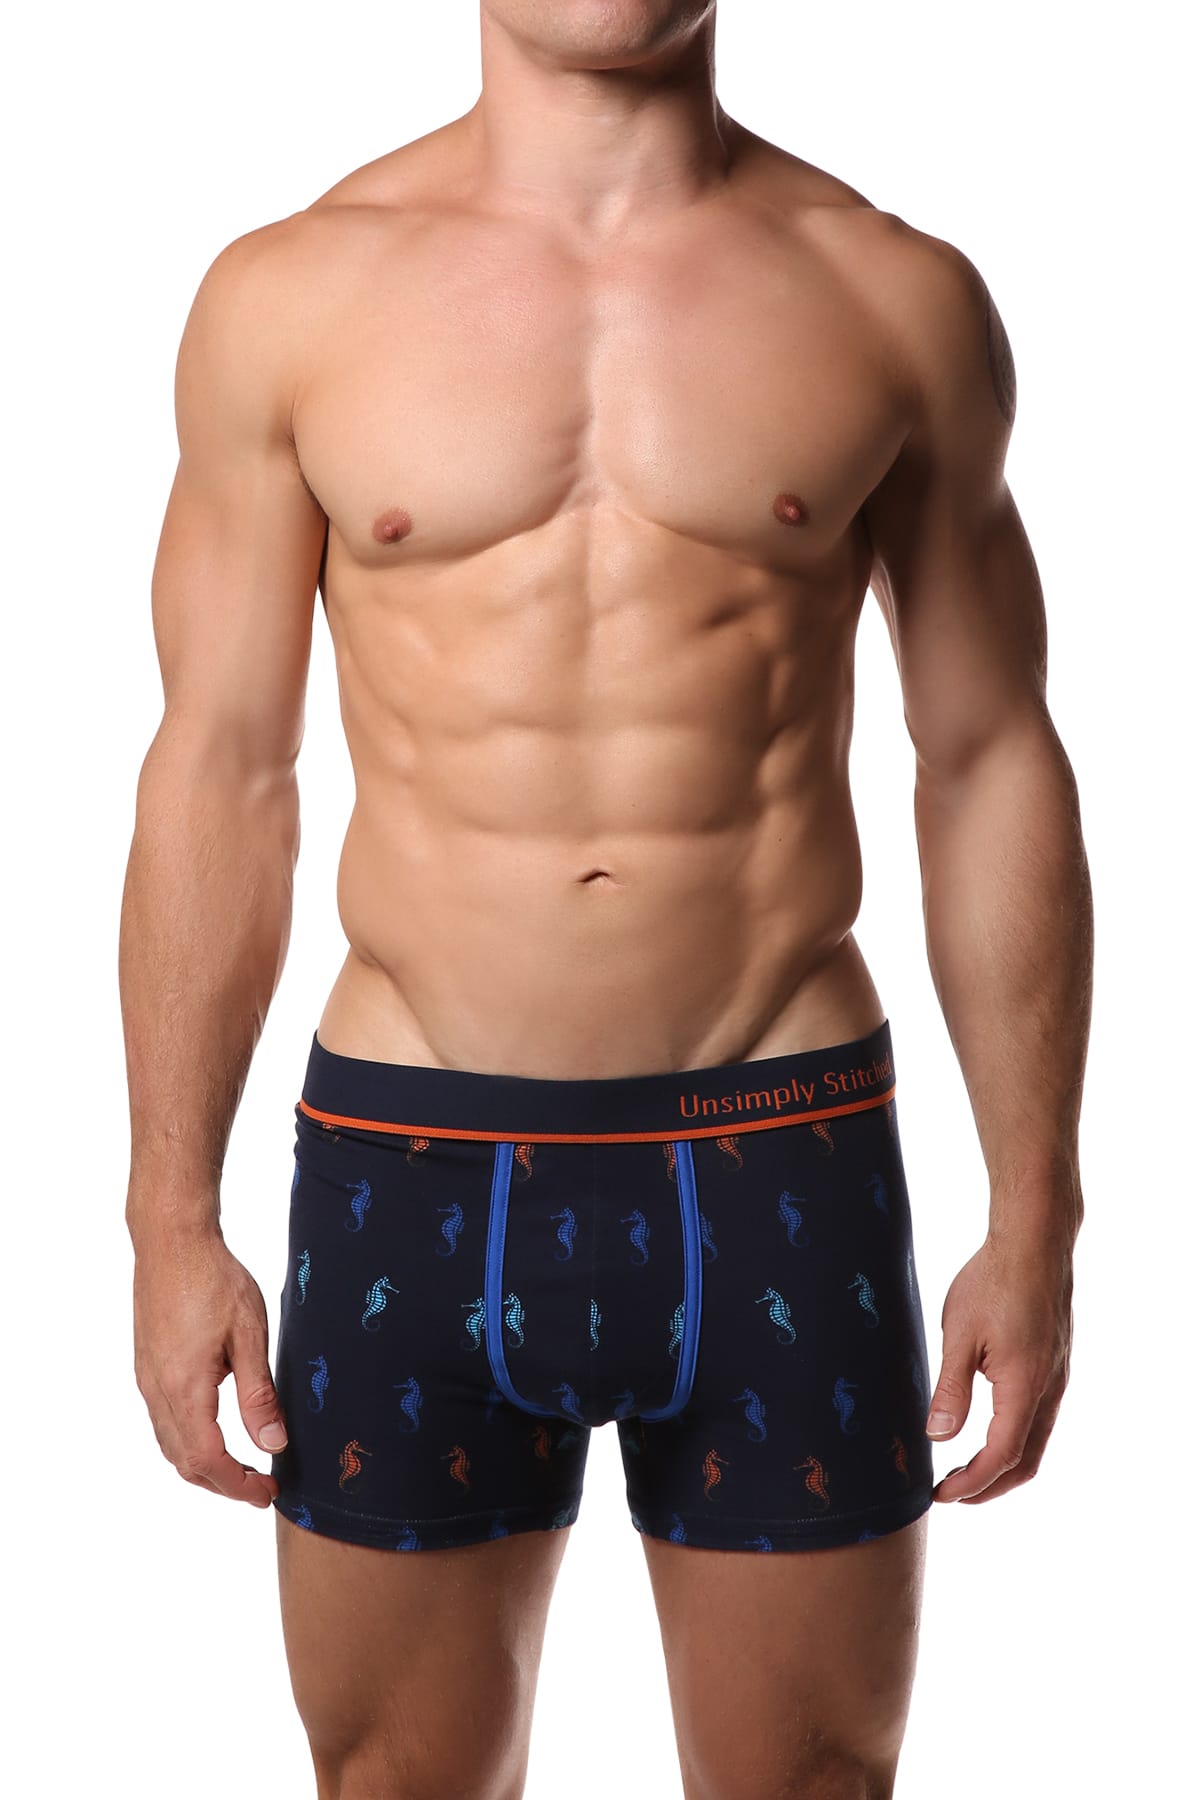 Unsimply Stitched Navy Seahorse Trunk